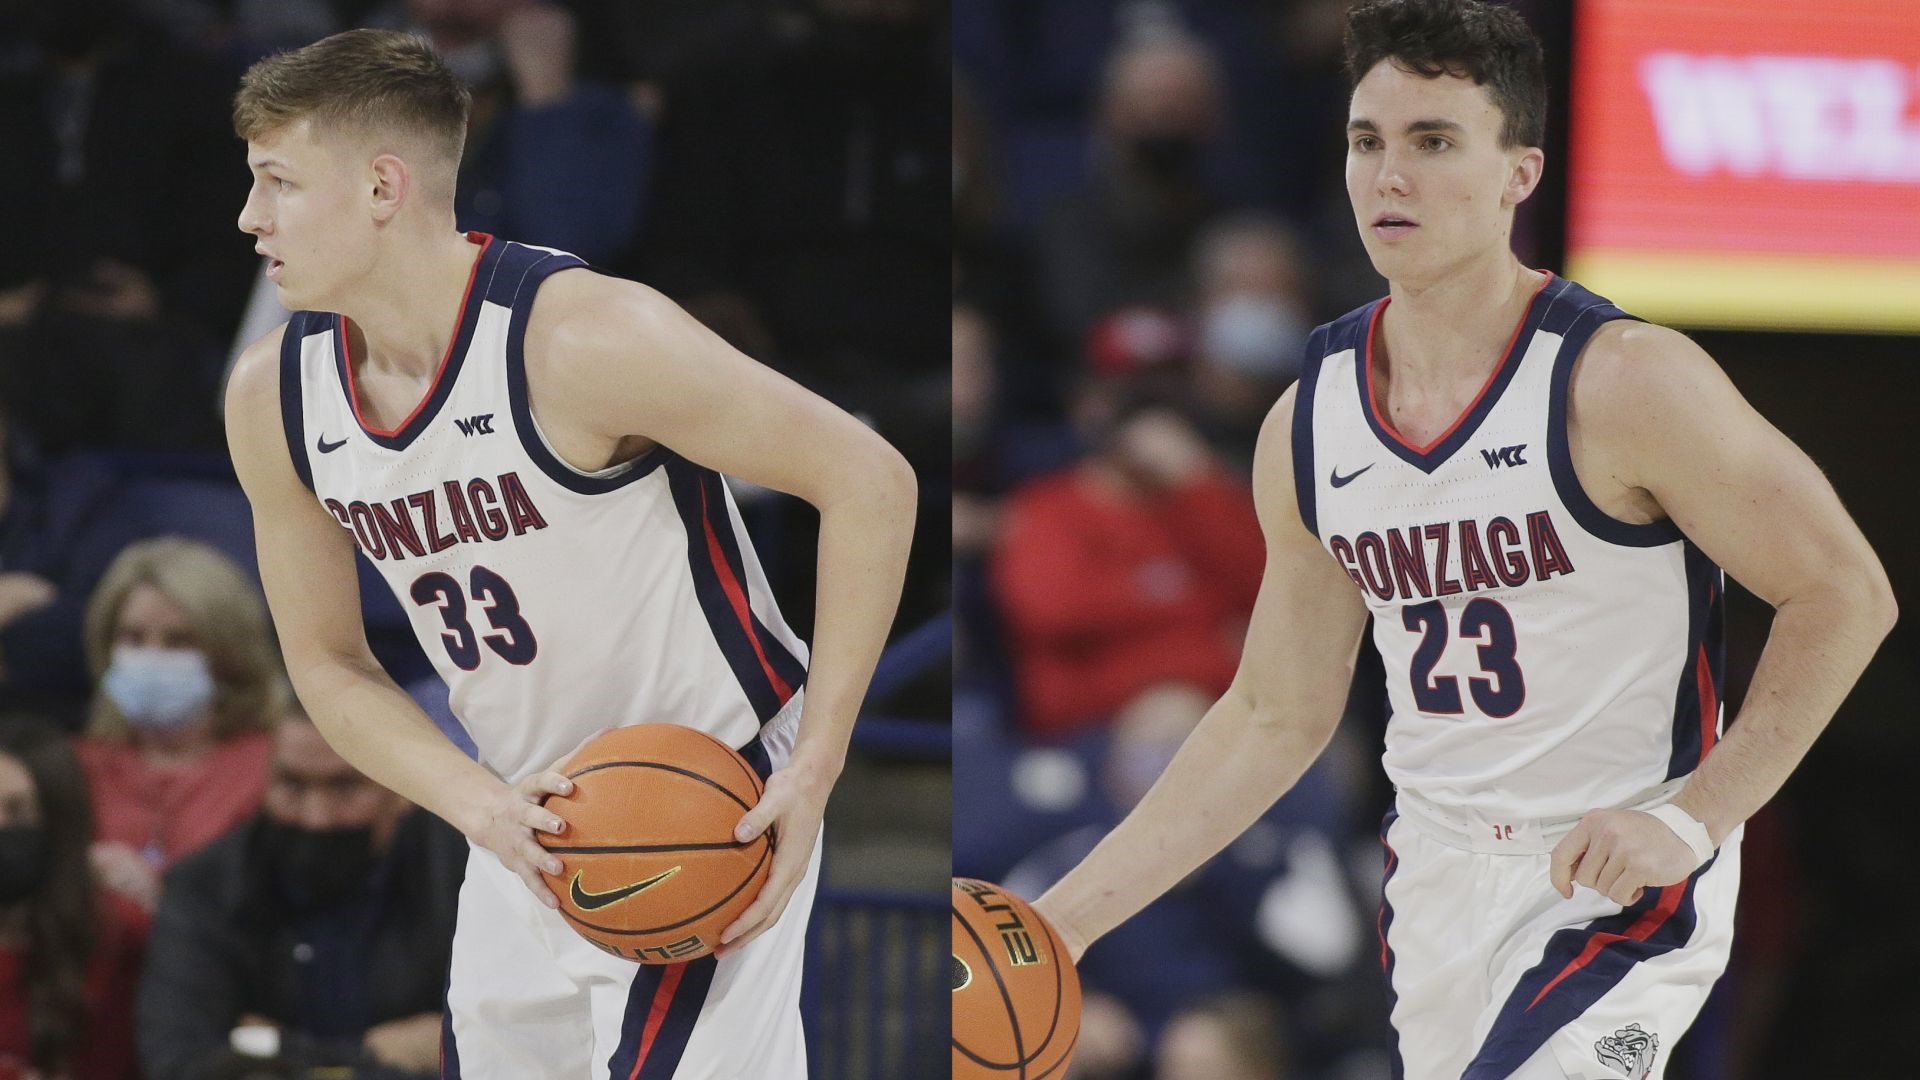 Both Ben Gregg and Matt Lang have never played at the Moda Center before. They’ll get their shot potentially twice this weekend.